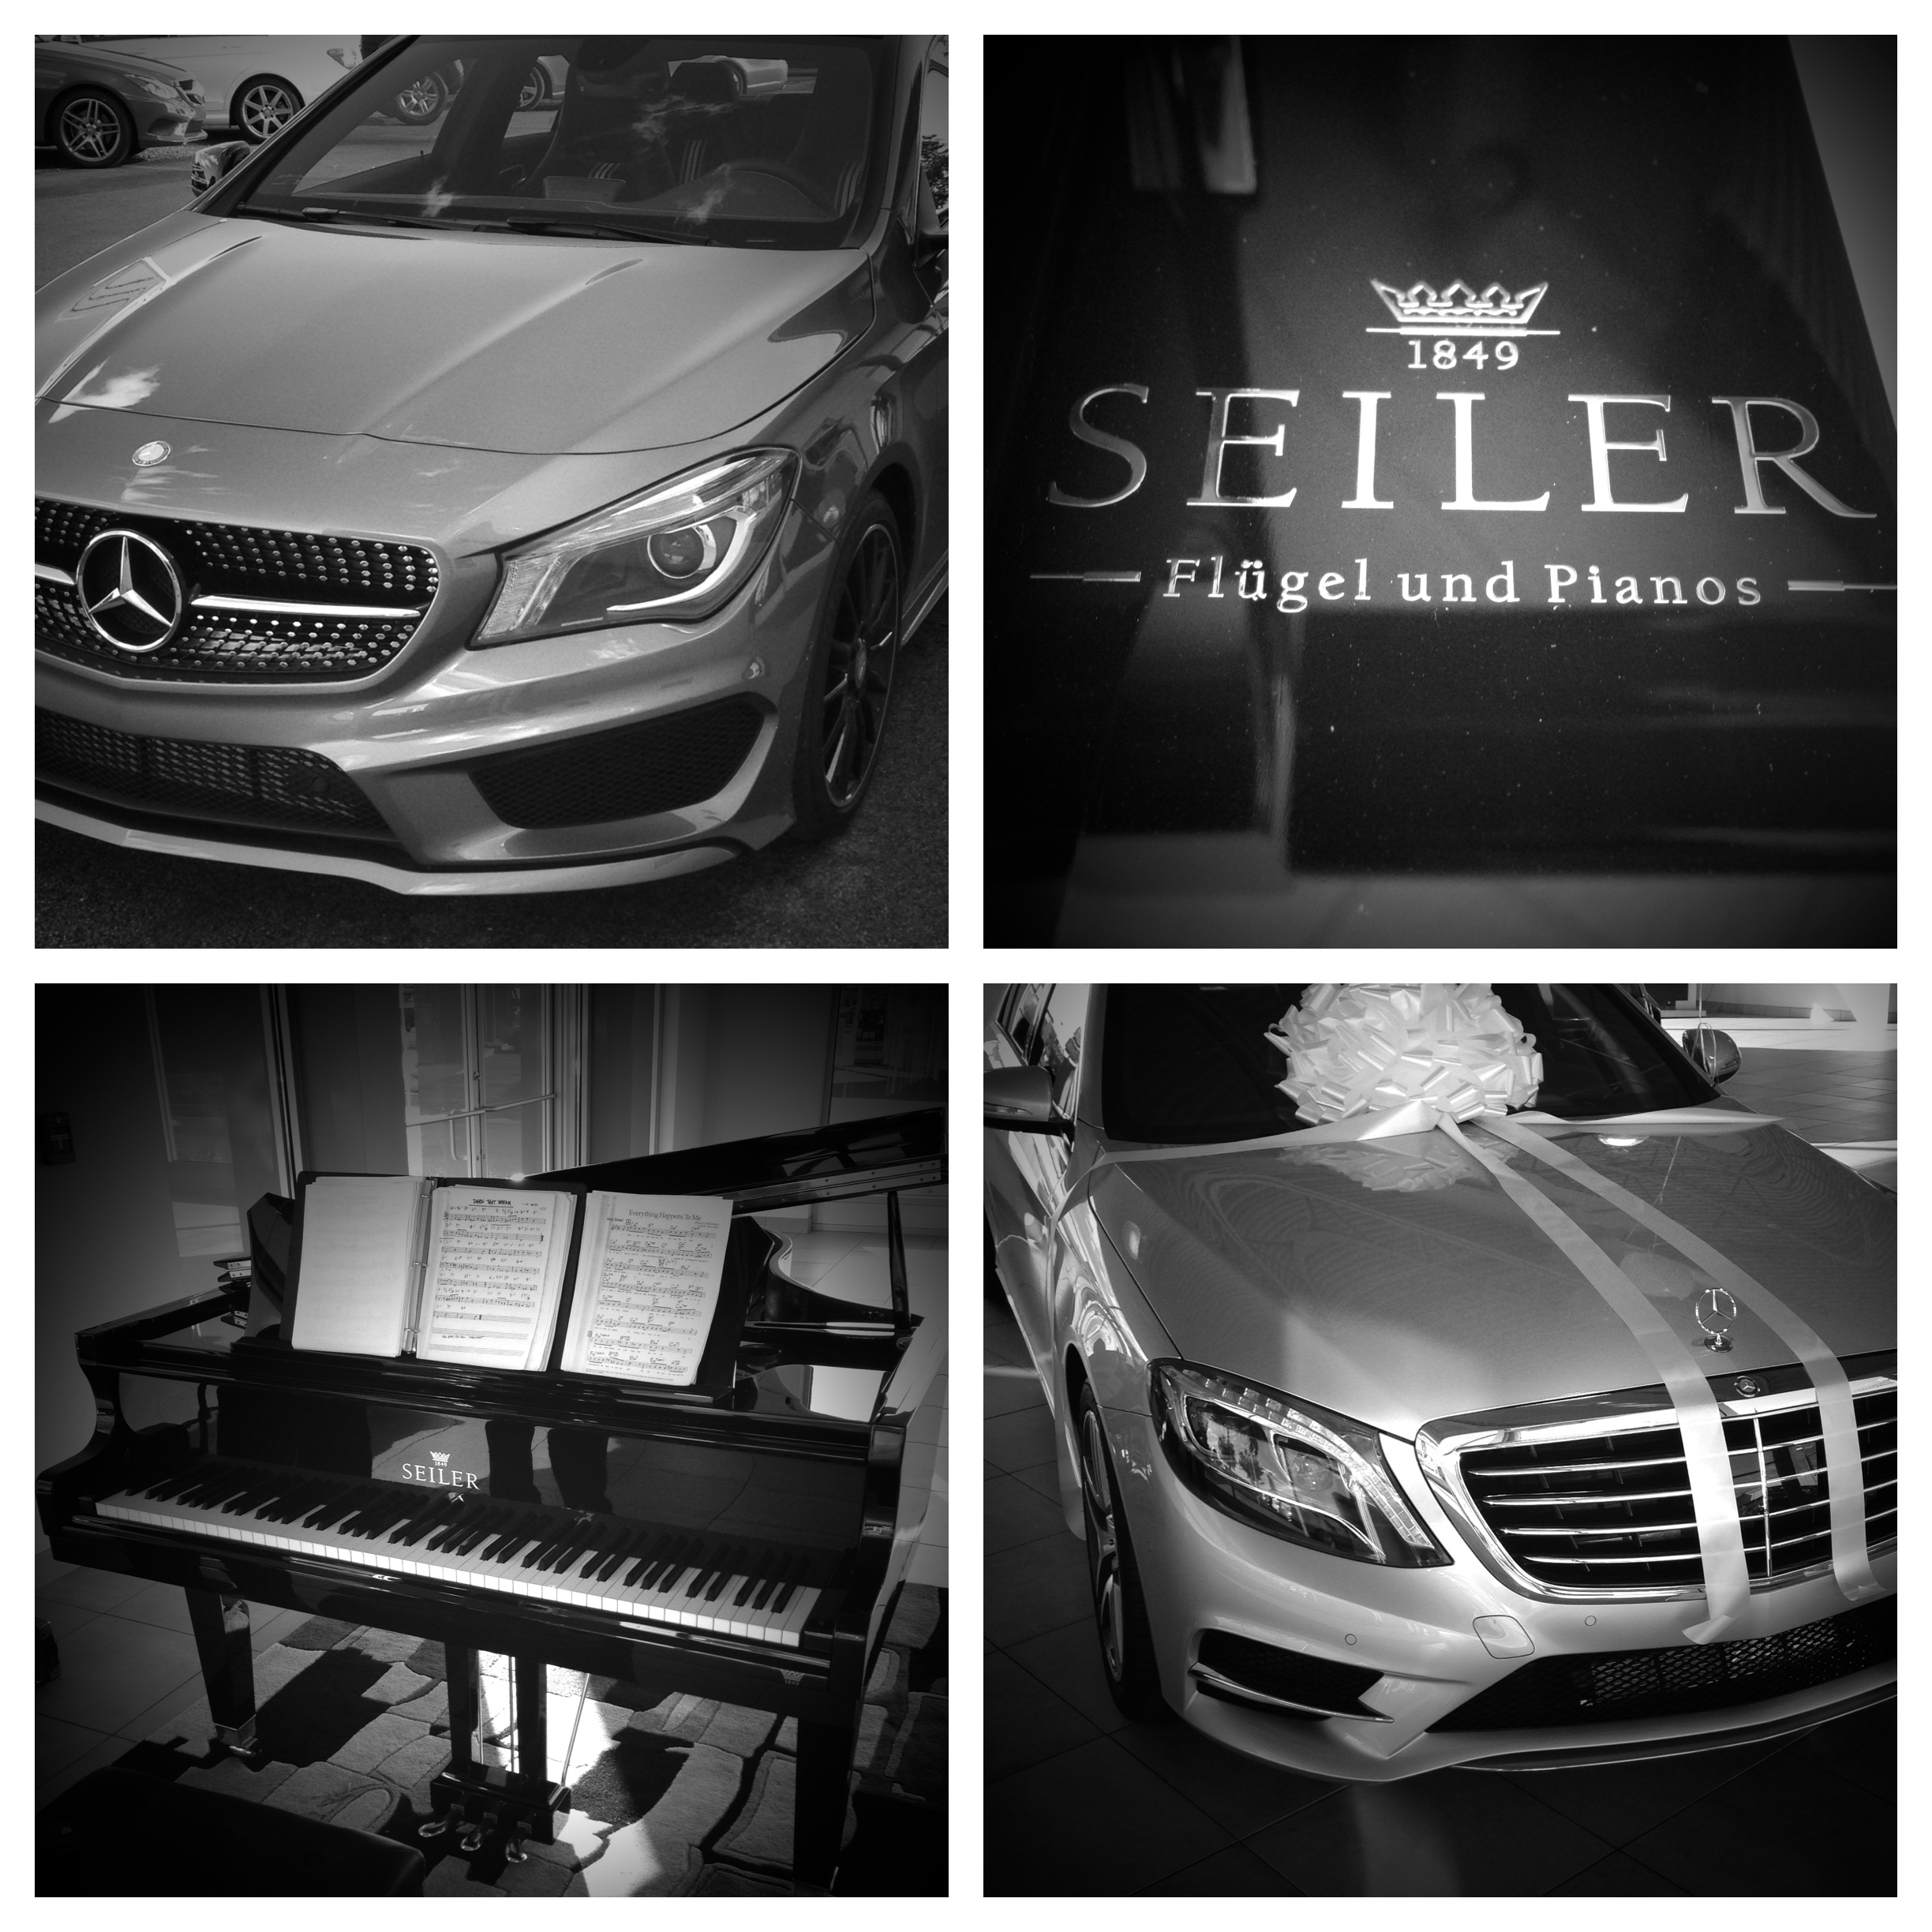 Mercedes benz dearlers in marion illinois